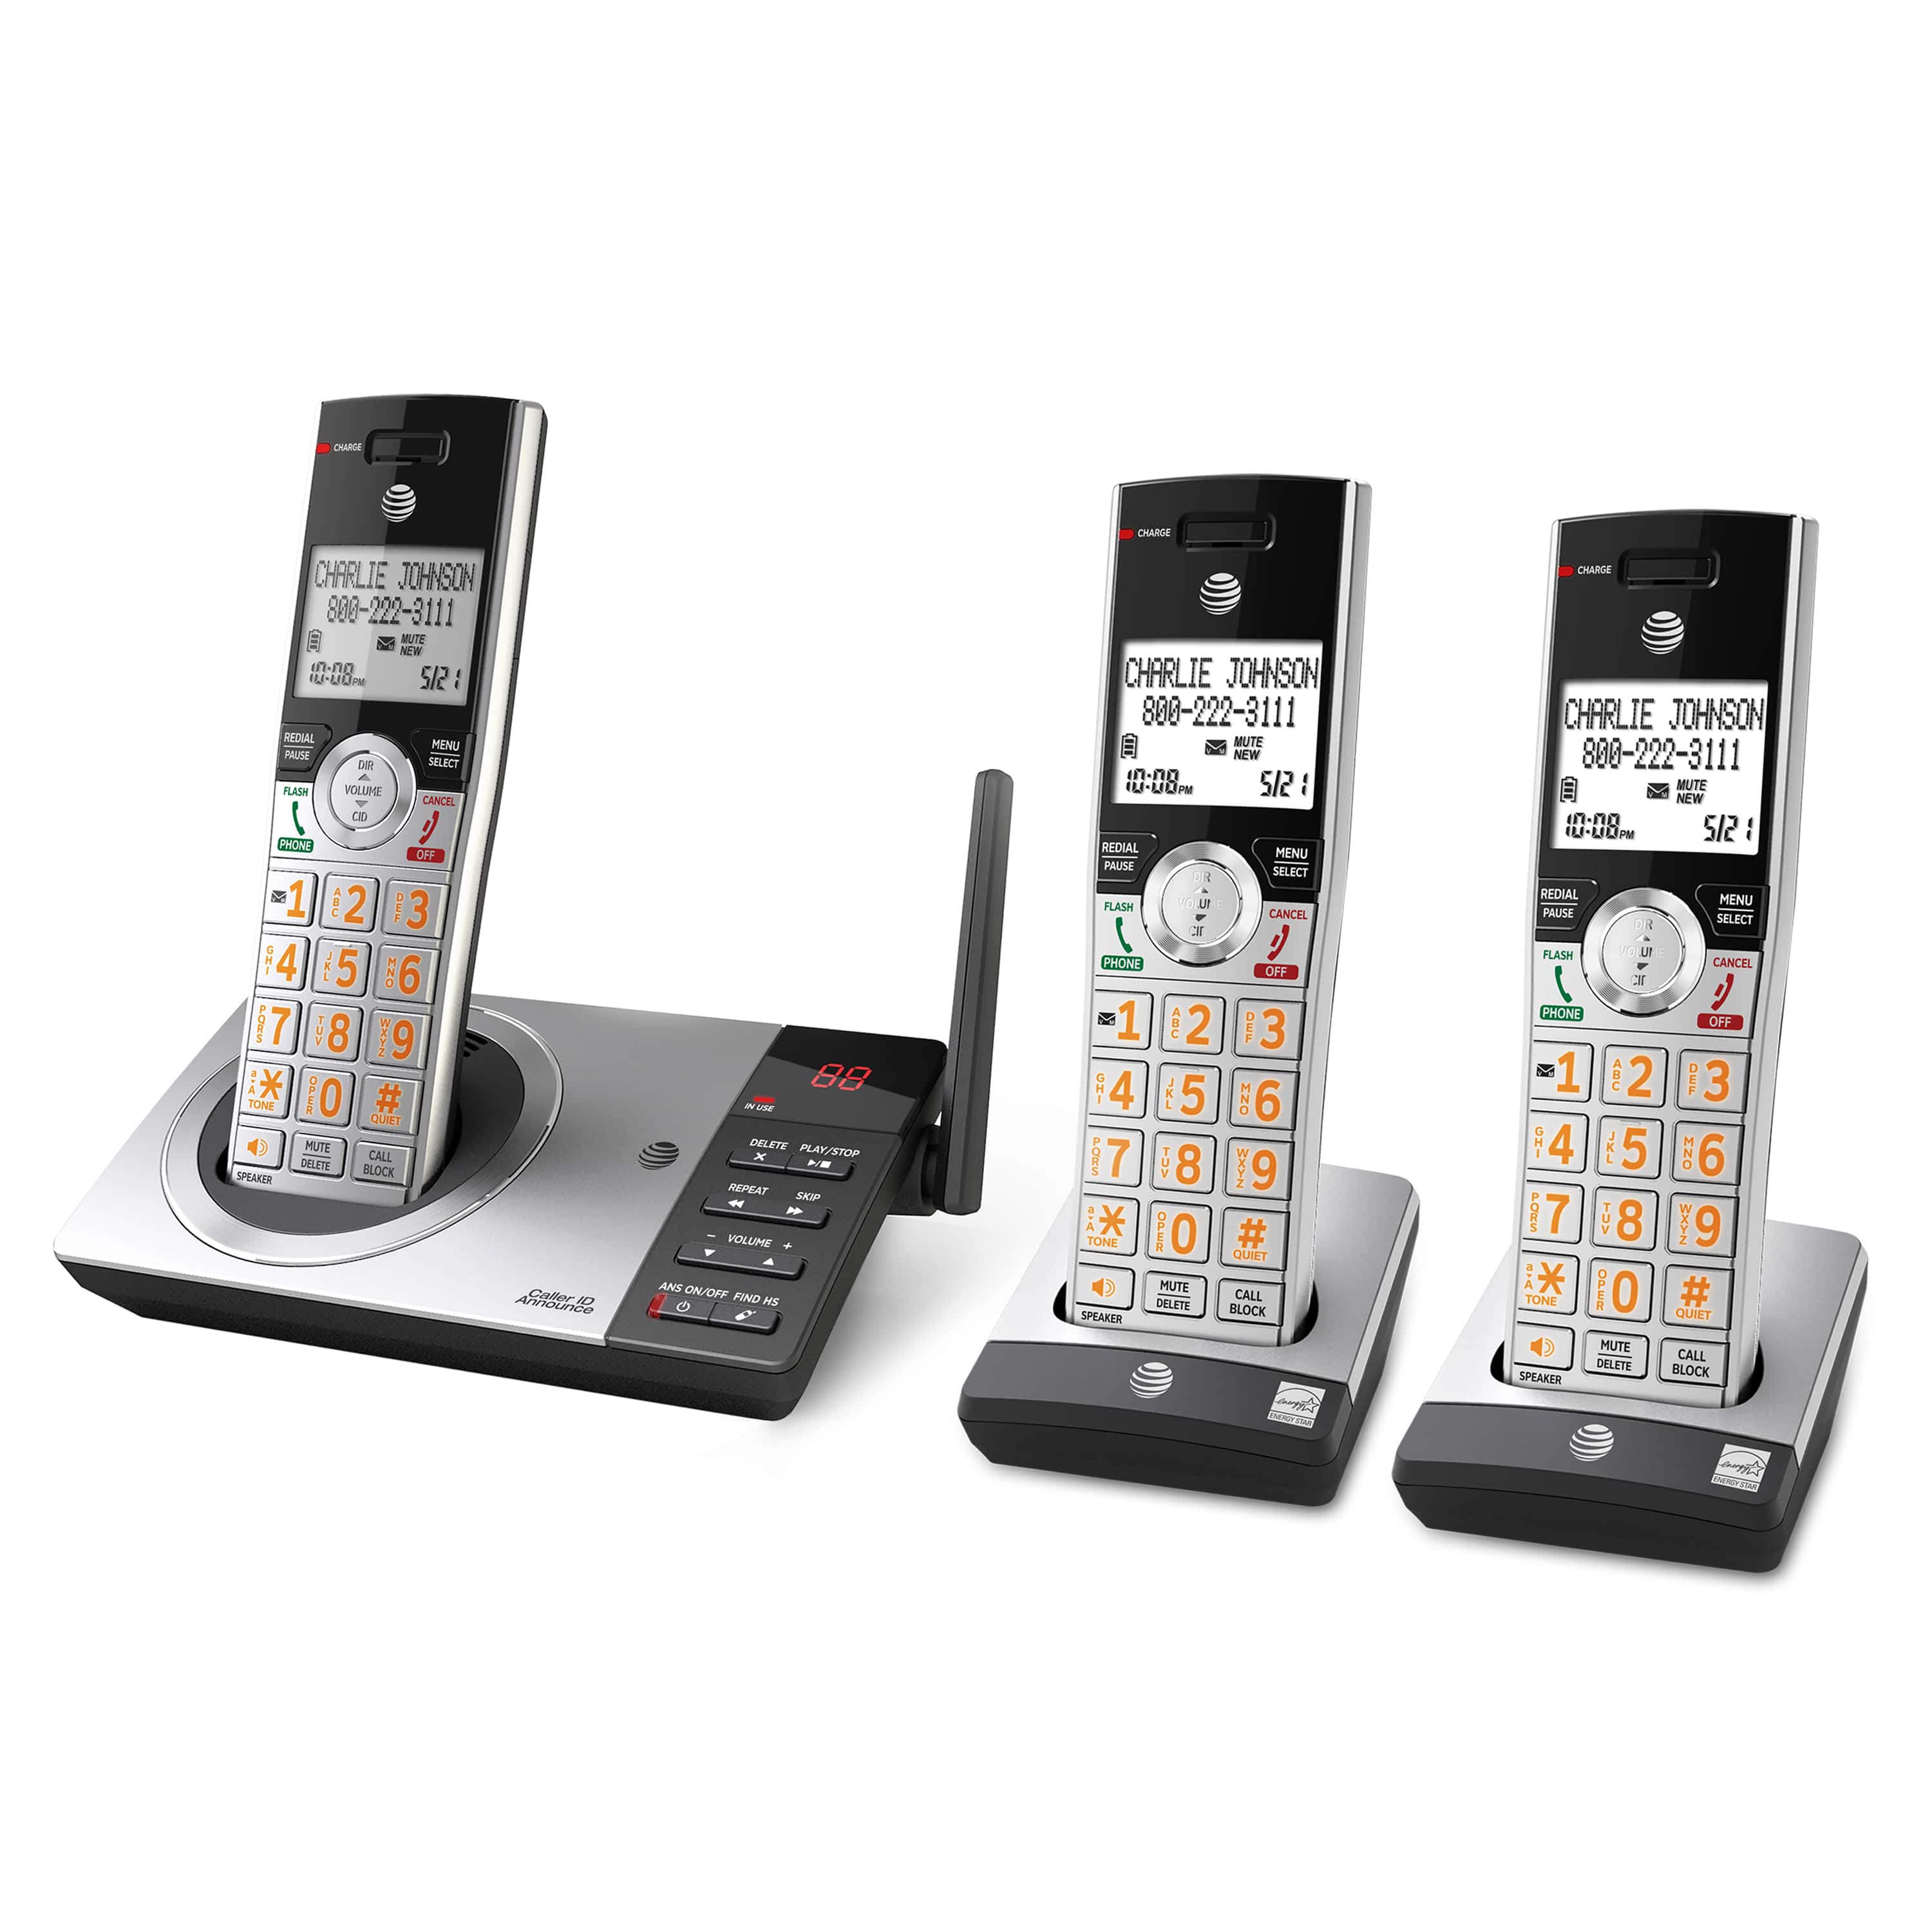 6 handset phone system with smart call blocker - view 2